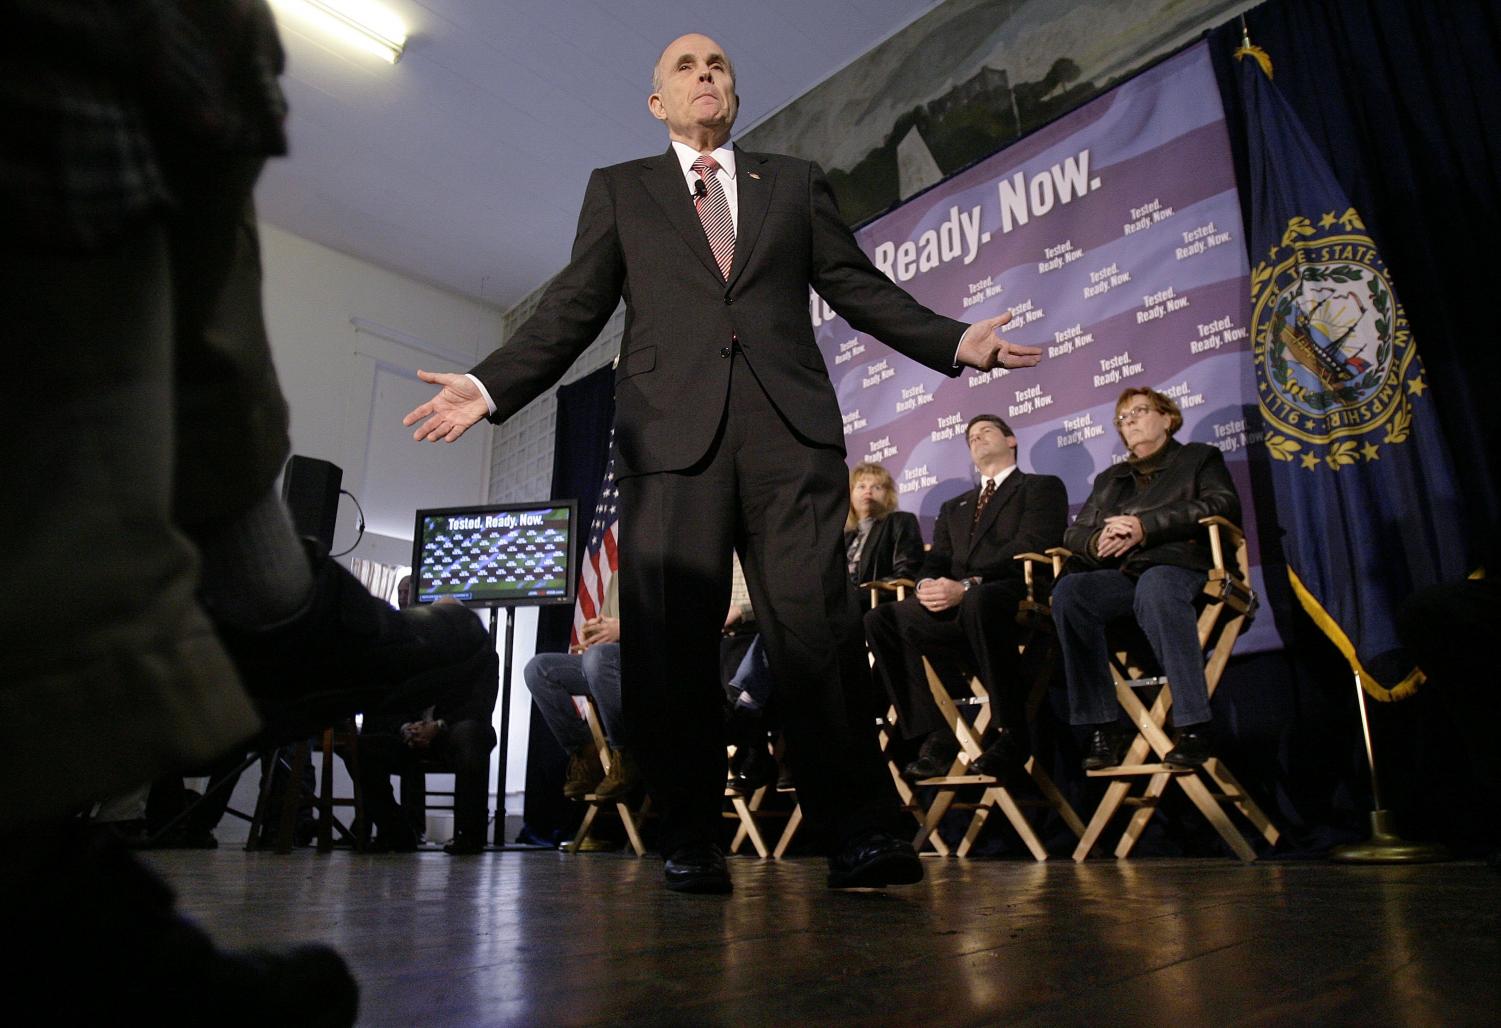 Republican presidential hopeful Rudy Giuliani campaigns in New Hampshires first in the nation presidential primary on Monday afternoon. Californias primaries will happen on Feb. 5.